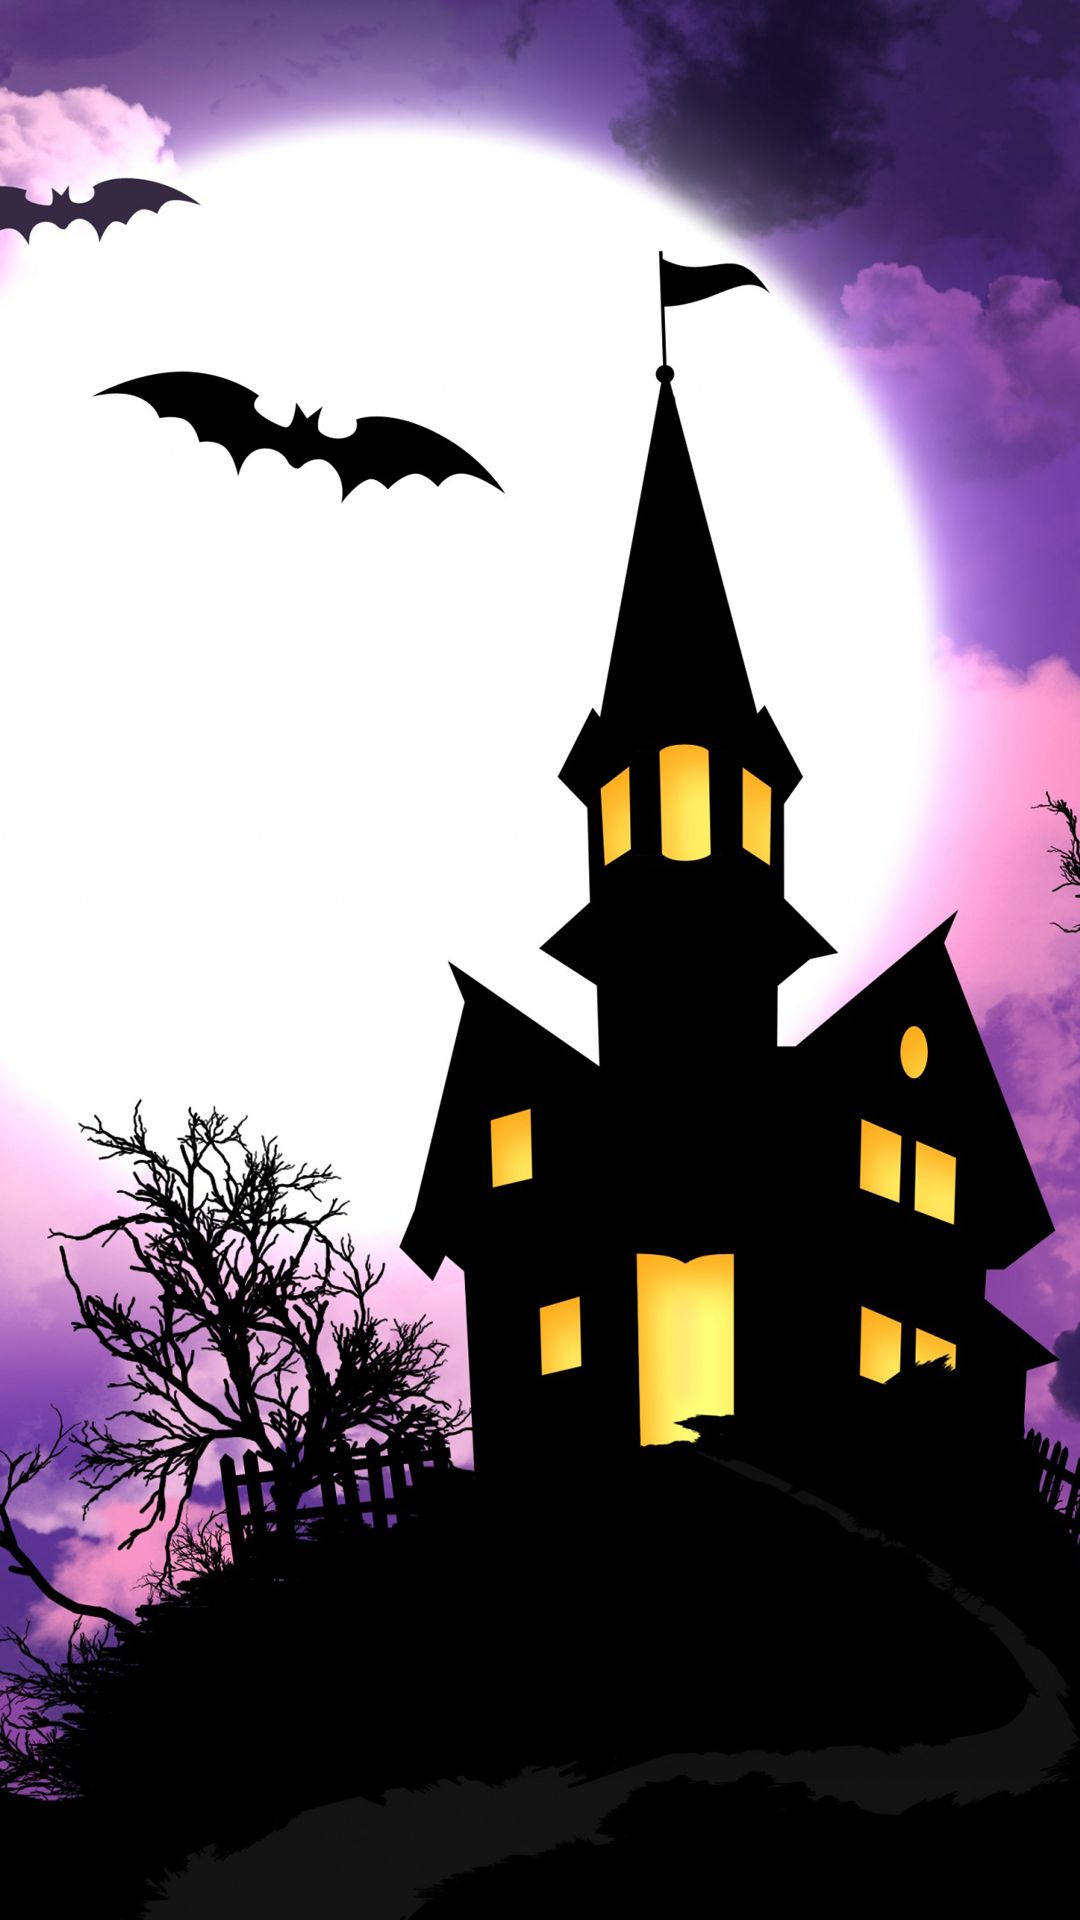 Spooky house Halloween htc one wallpaper, free and easy to download